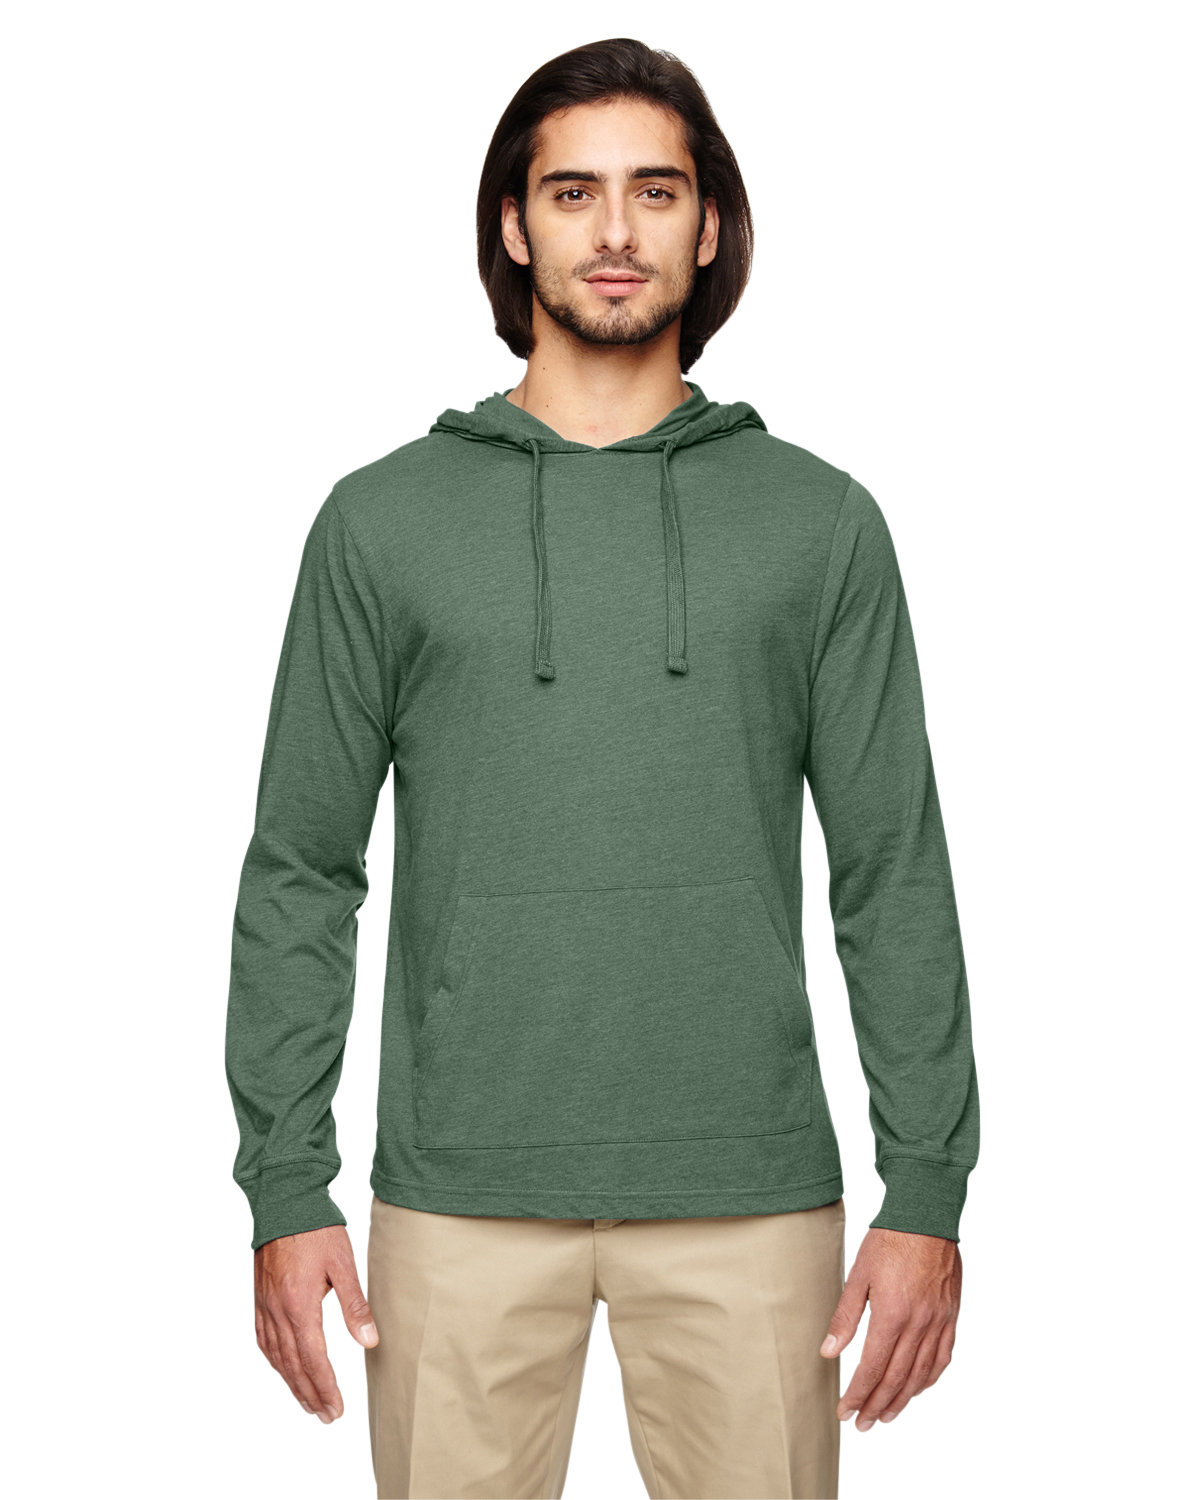 Unisex Eco Blend Long-Sleeve Pullover Hooded T-Shirt-econscious